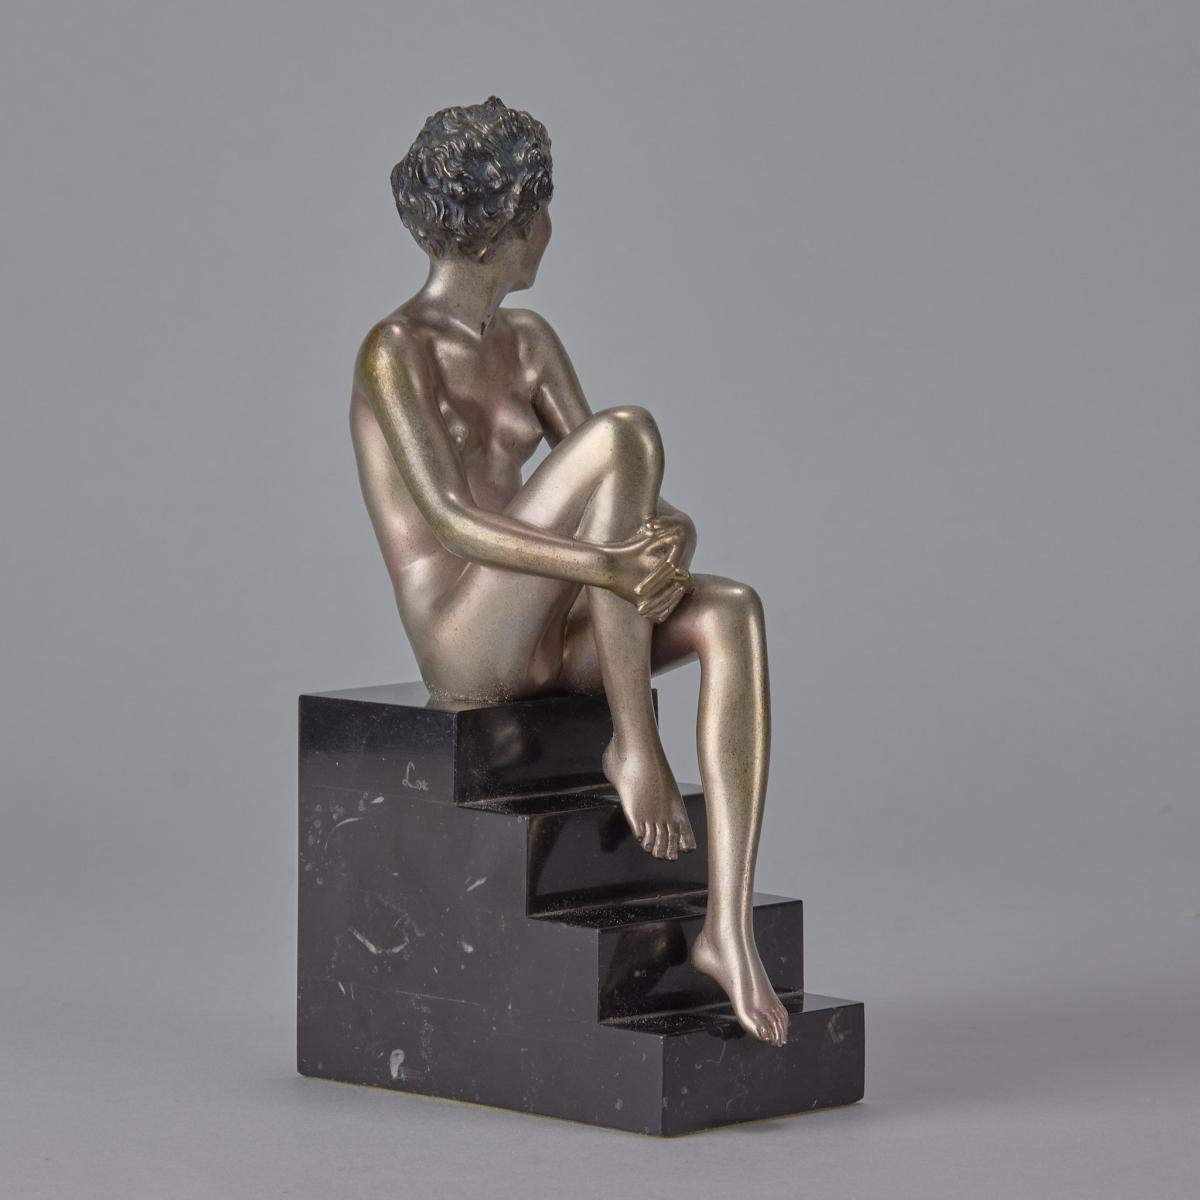 “Seated Beauty” Art Deco Cold Painted Bronze Sculpture by Josef Lorenzl - circa 1930